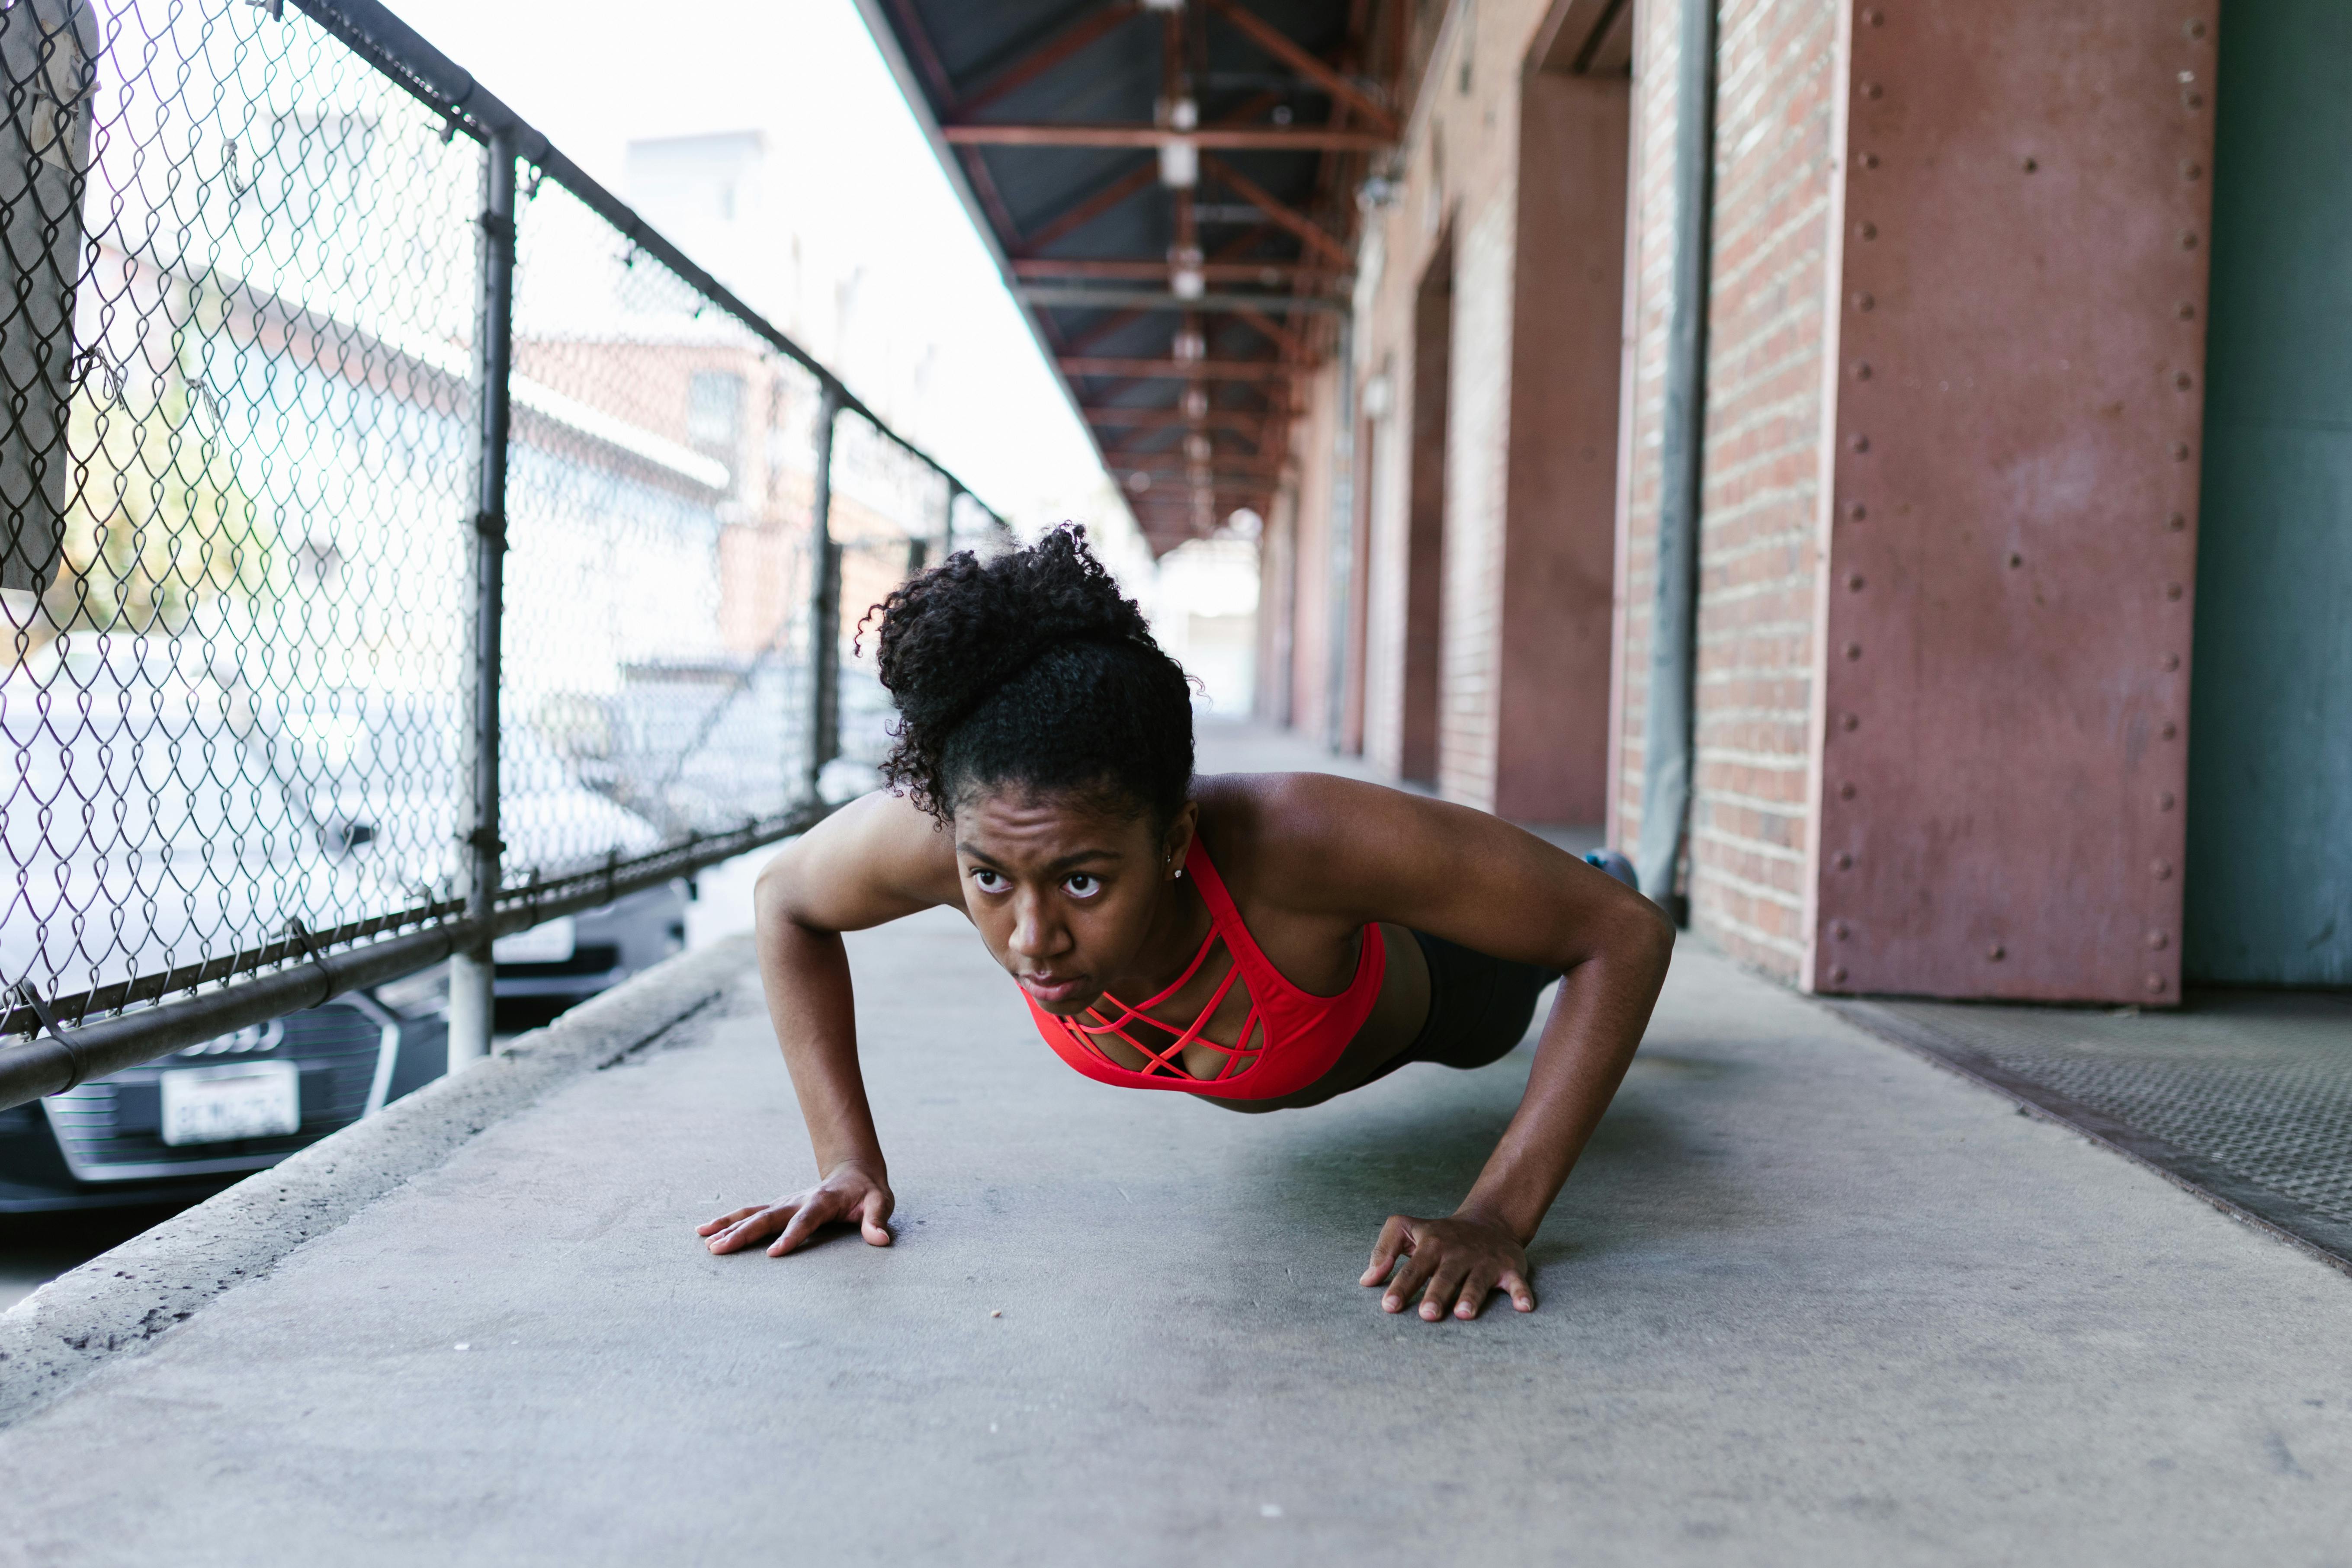 Premium Photo  Strong athletic black woman in a gym doing push-up  exercises in red sportswear